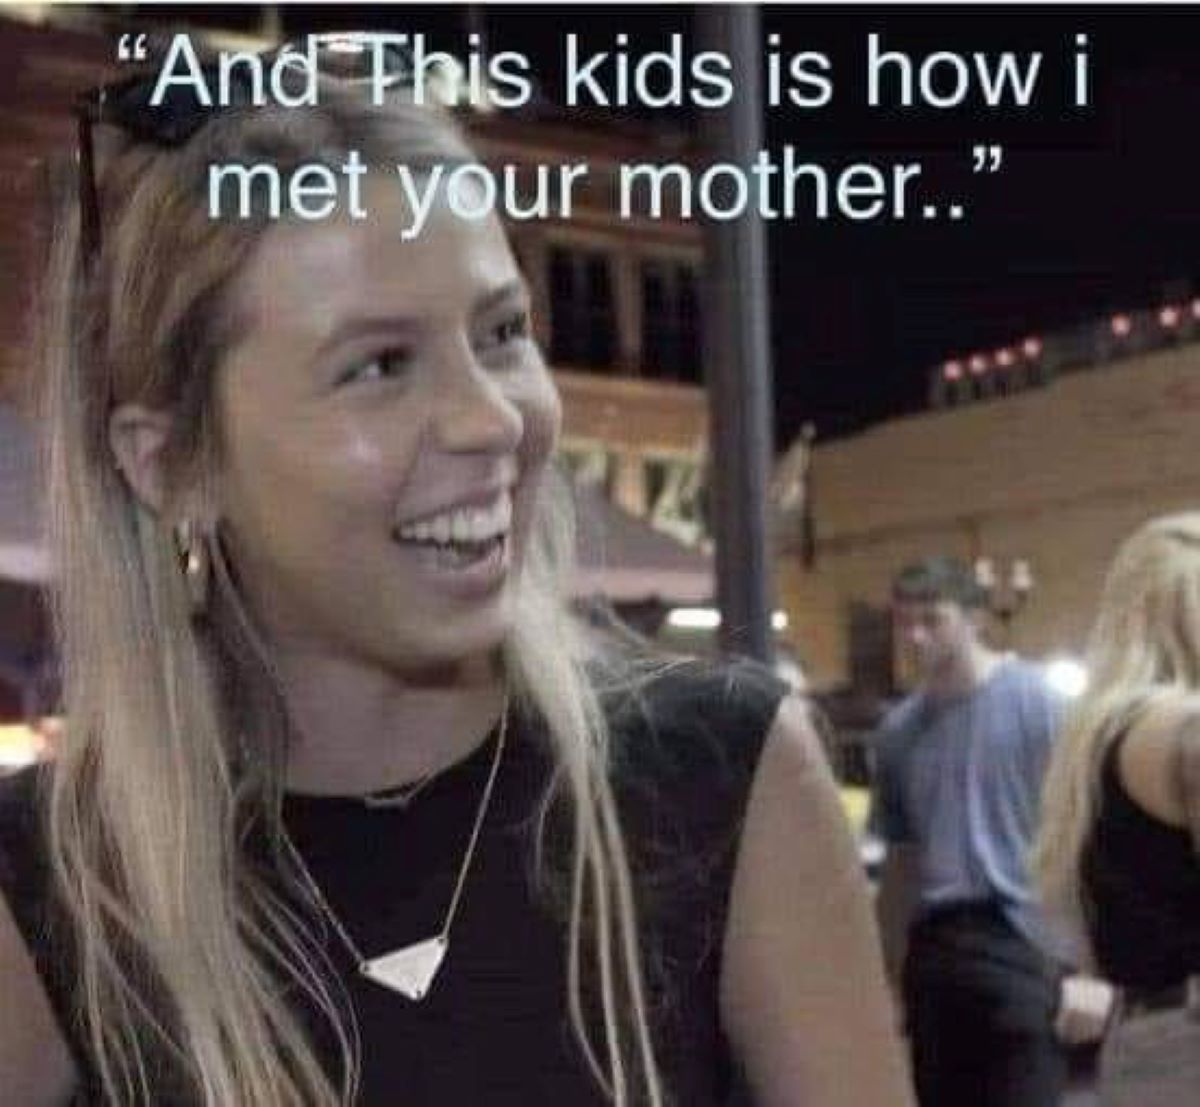 Funny meme - "And This kids is how i met your mother.."